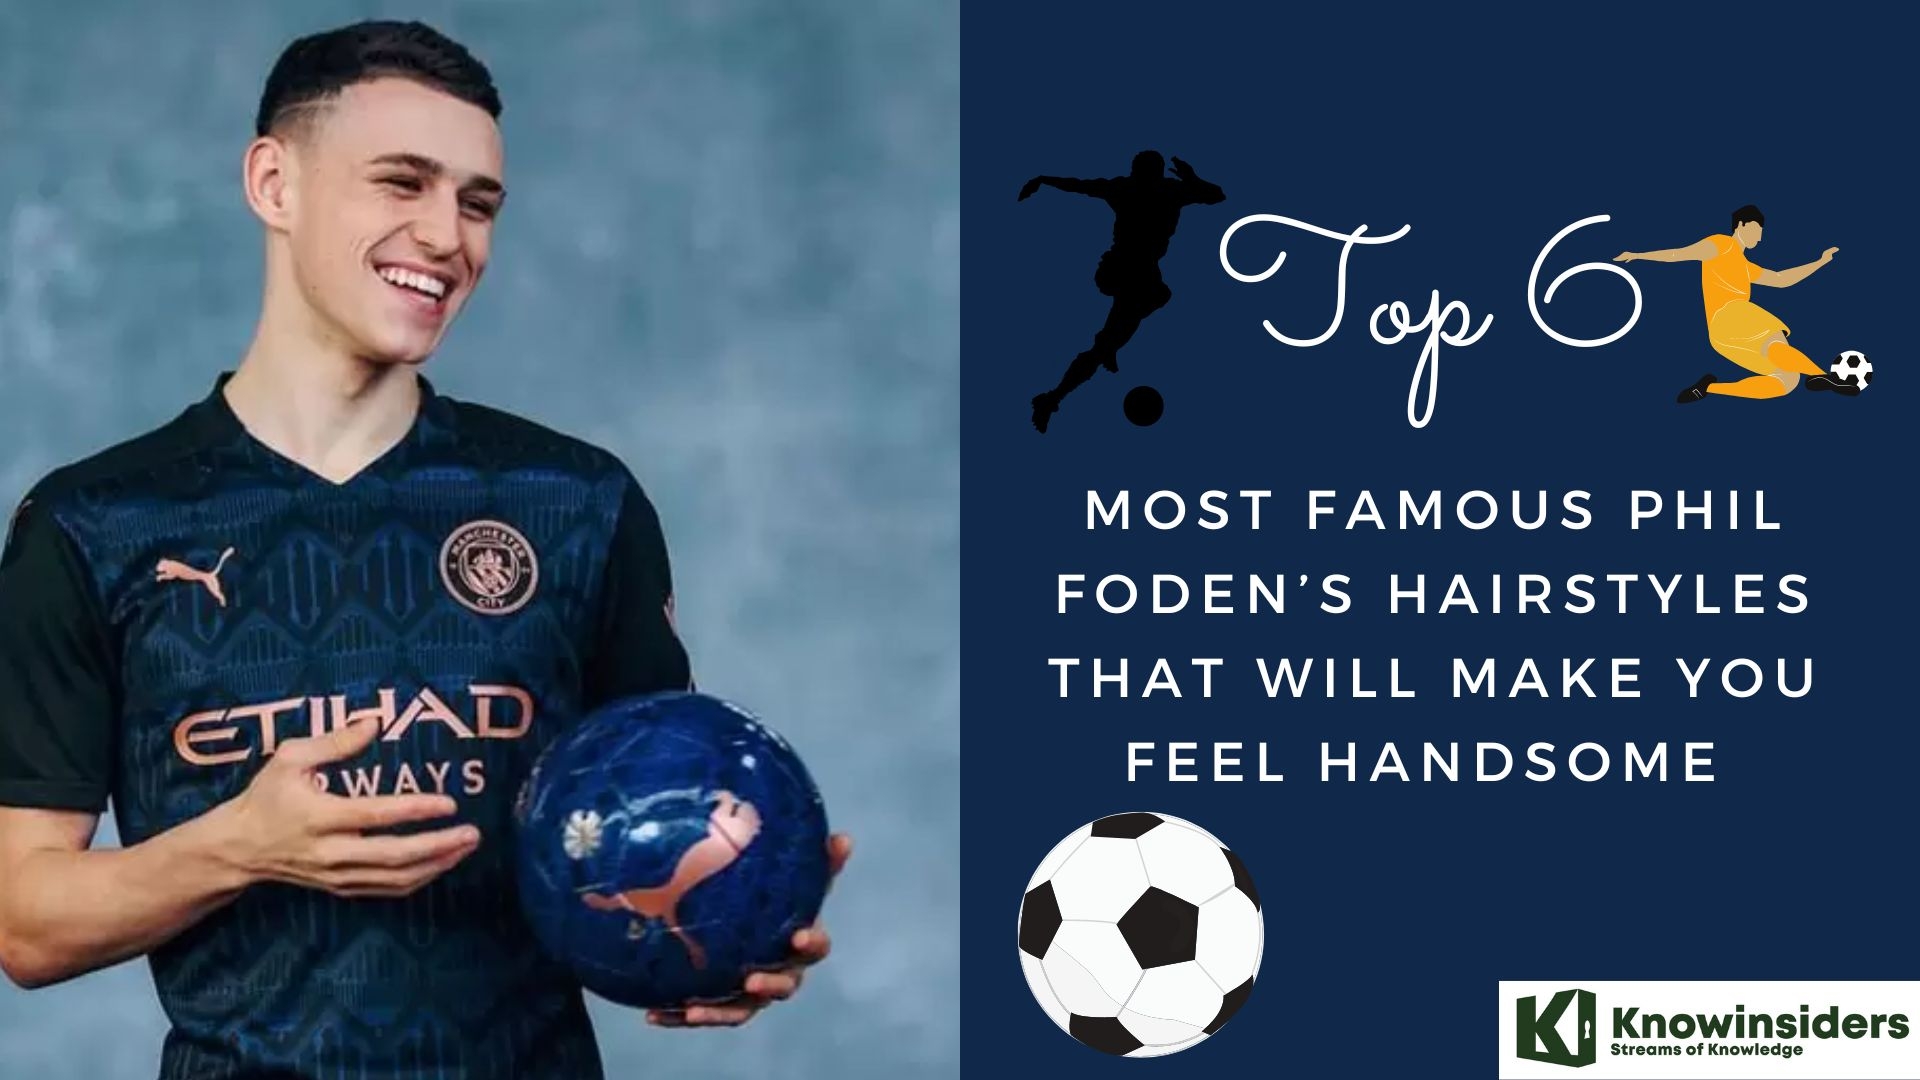 Top 6 Most Famous Phil Foden’s Hairstyles That Will Make You Feel Handsome  Knowinsiders.com 